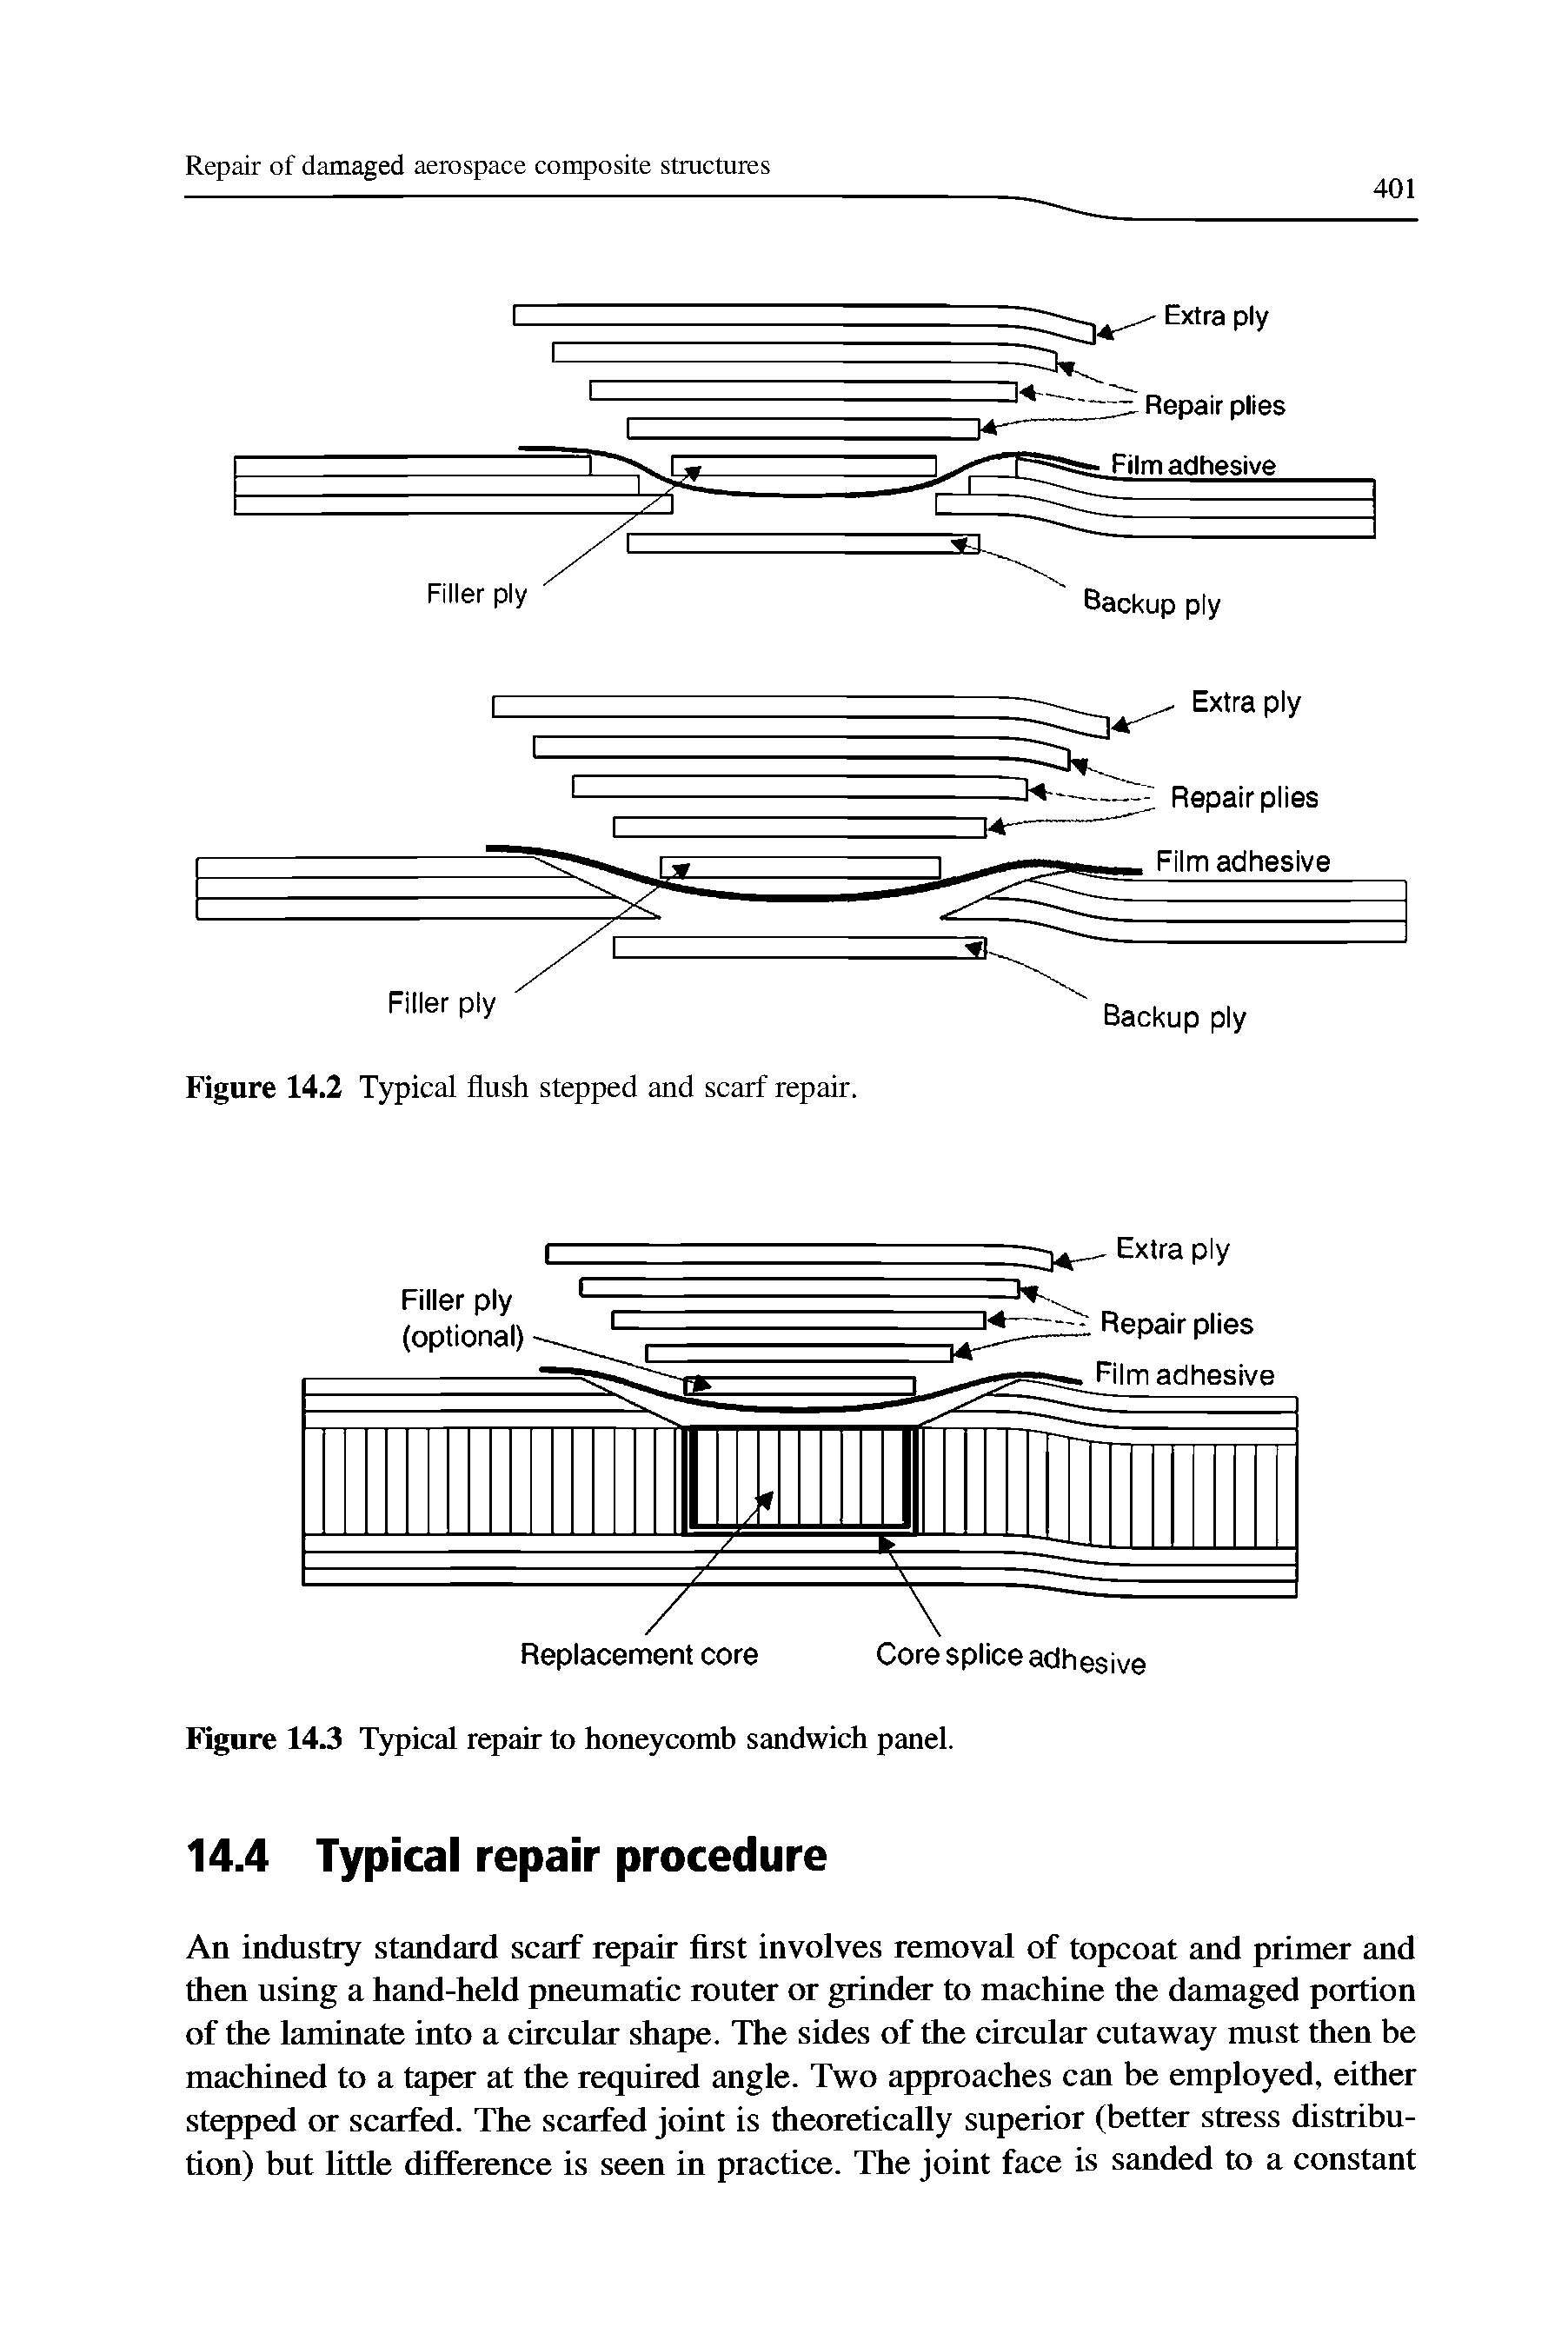 Figure 14.3 Typical repair to honeycomb sandwich panel.